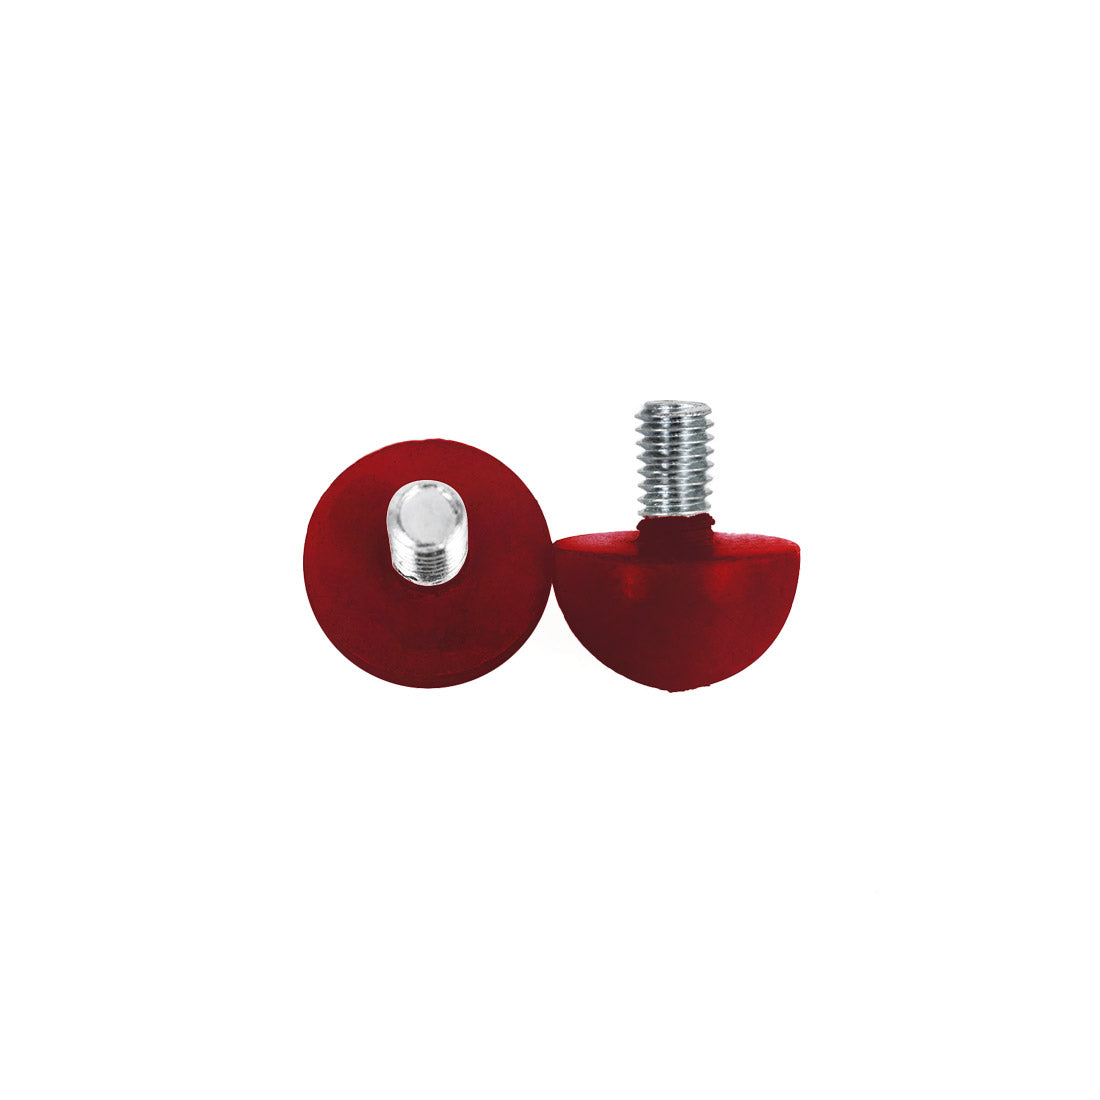 Sure-Grip Super X Dance Plugs Red Roller Skate Hardware and Parts